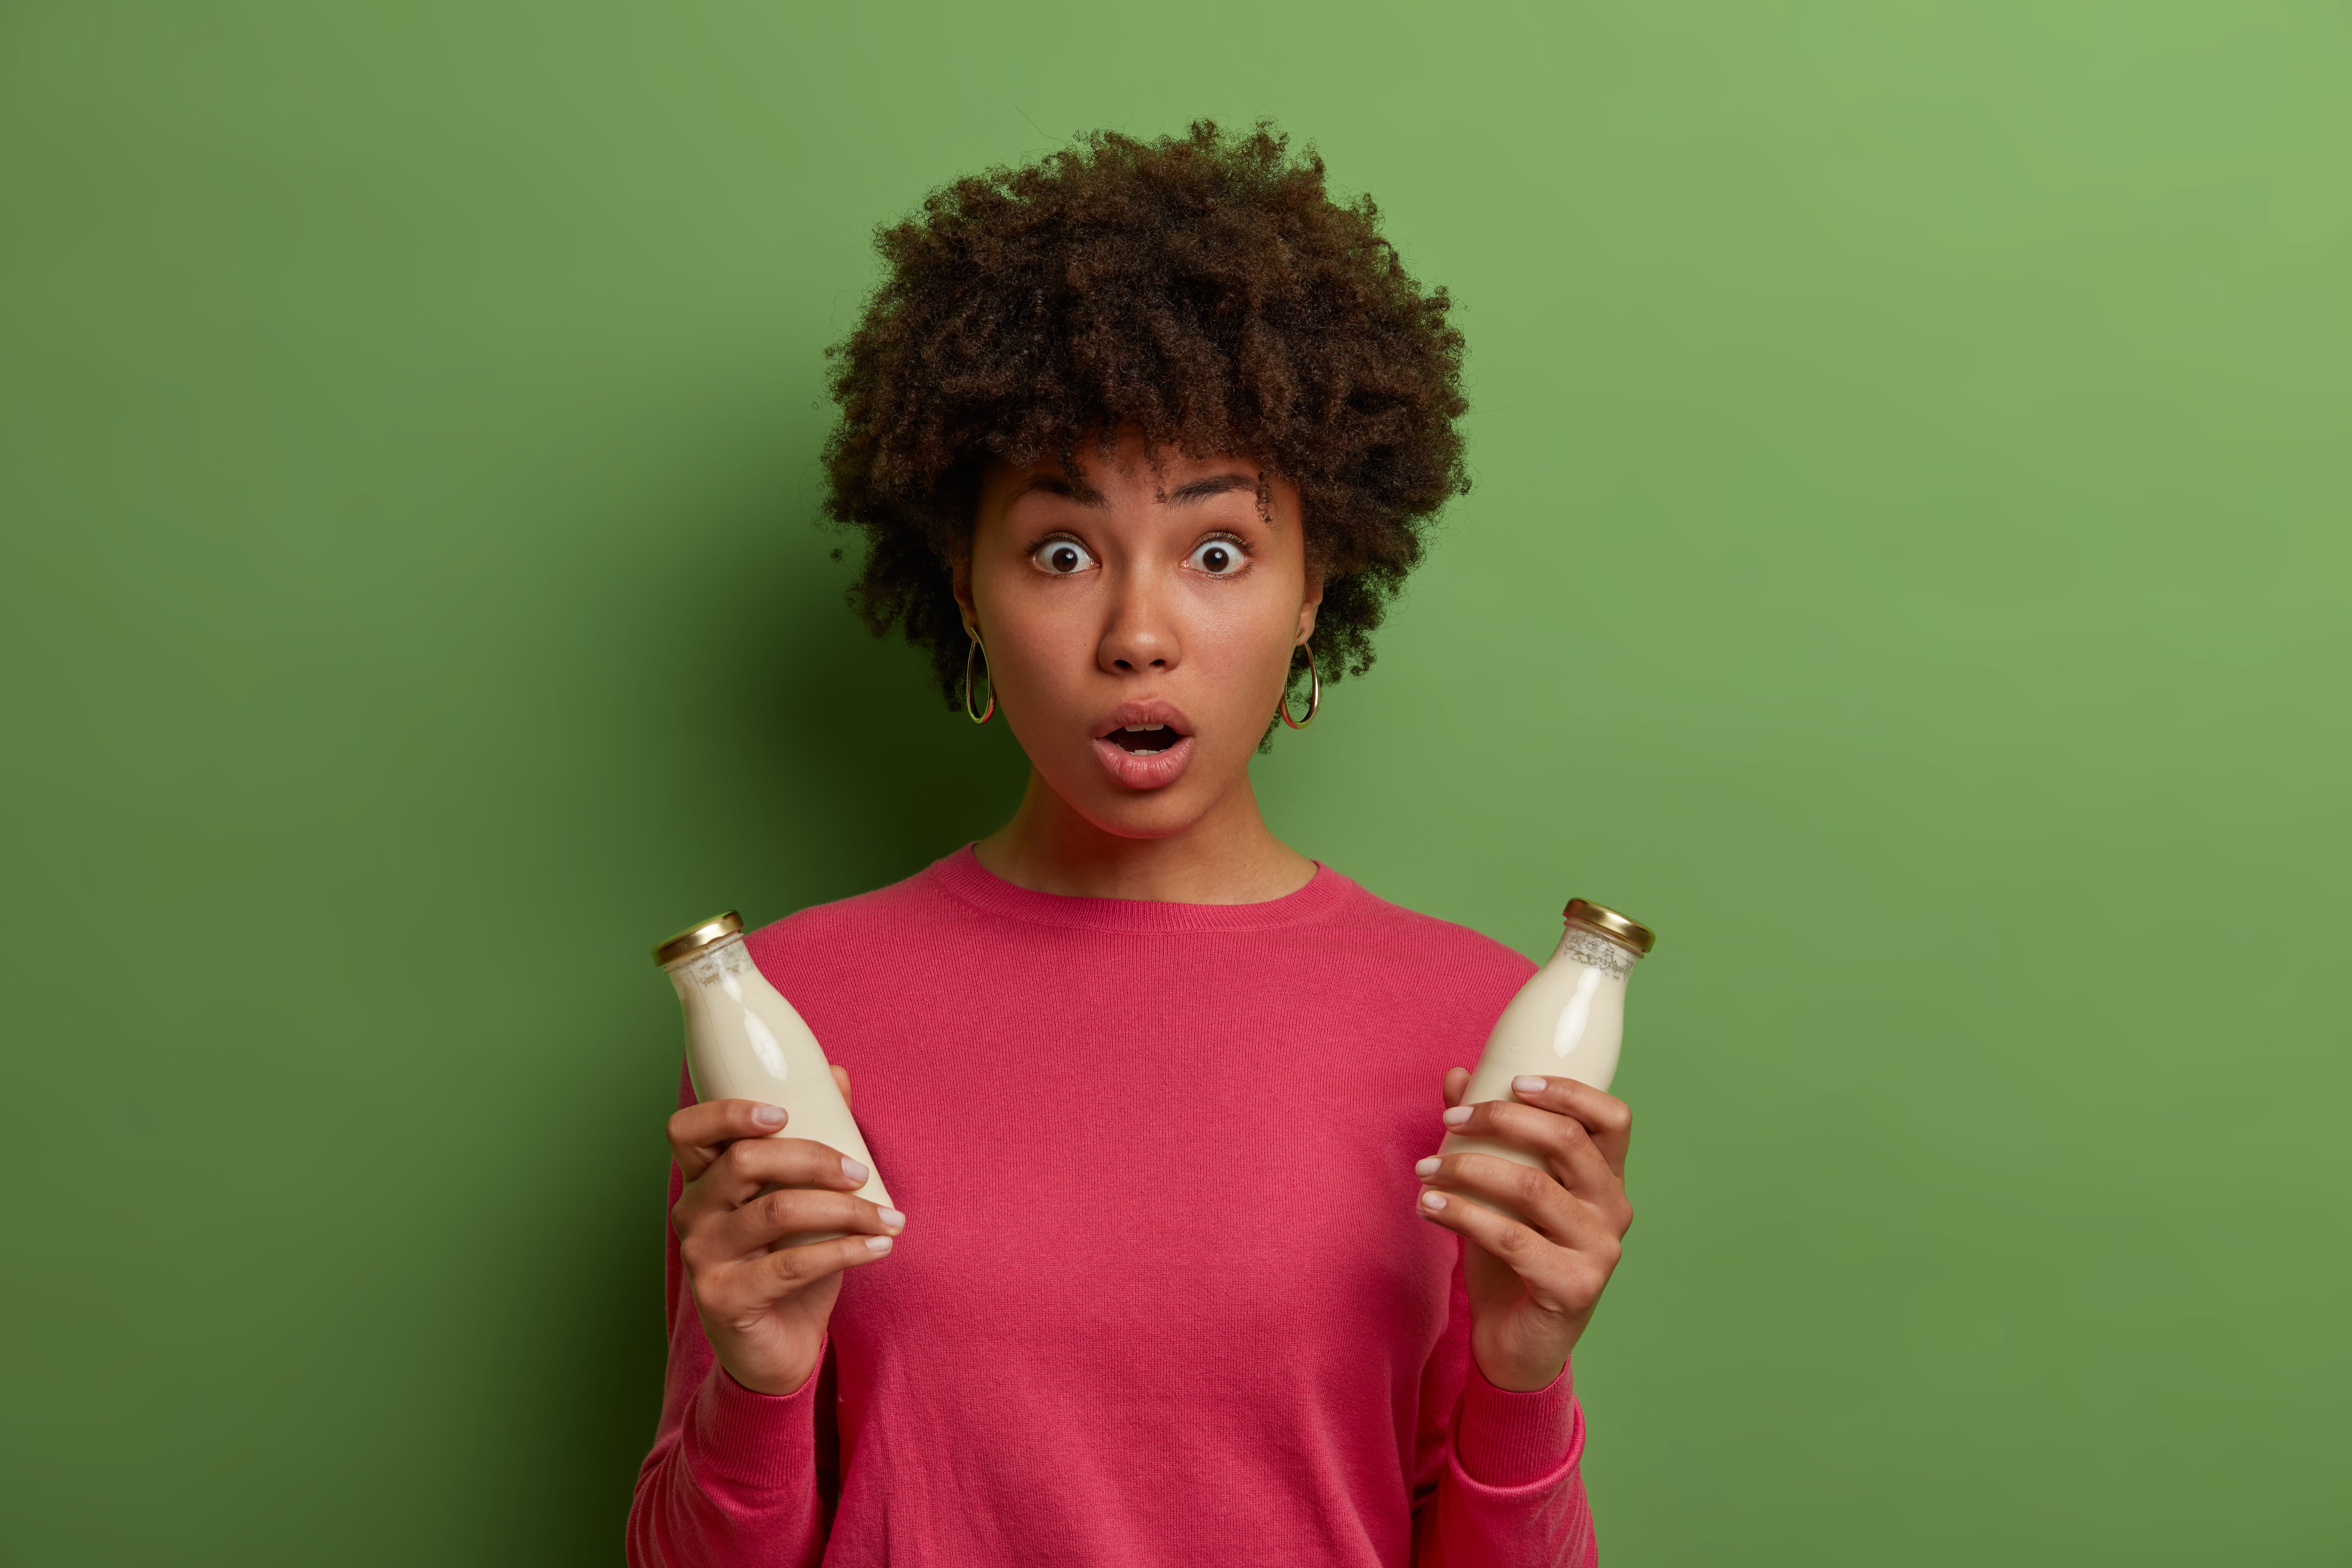 Products to avoid for curly hair